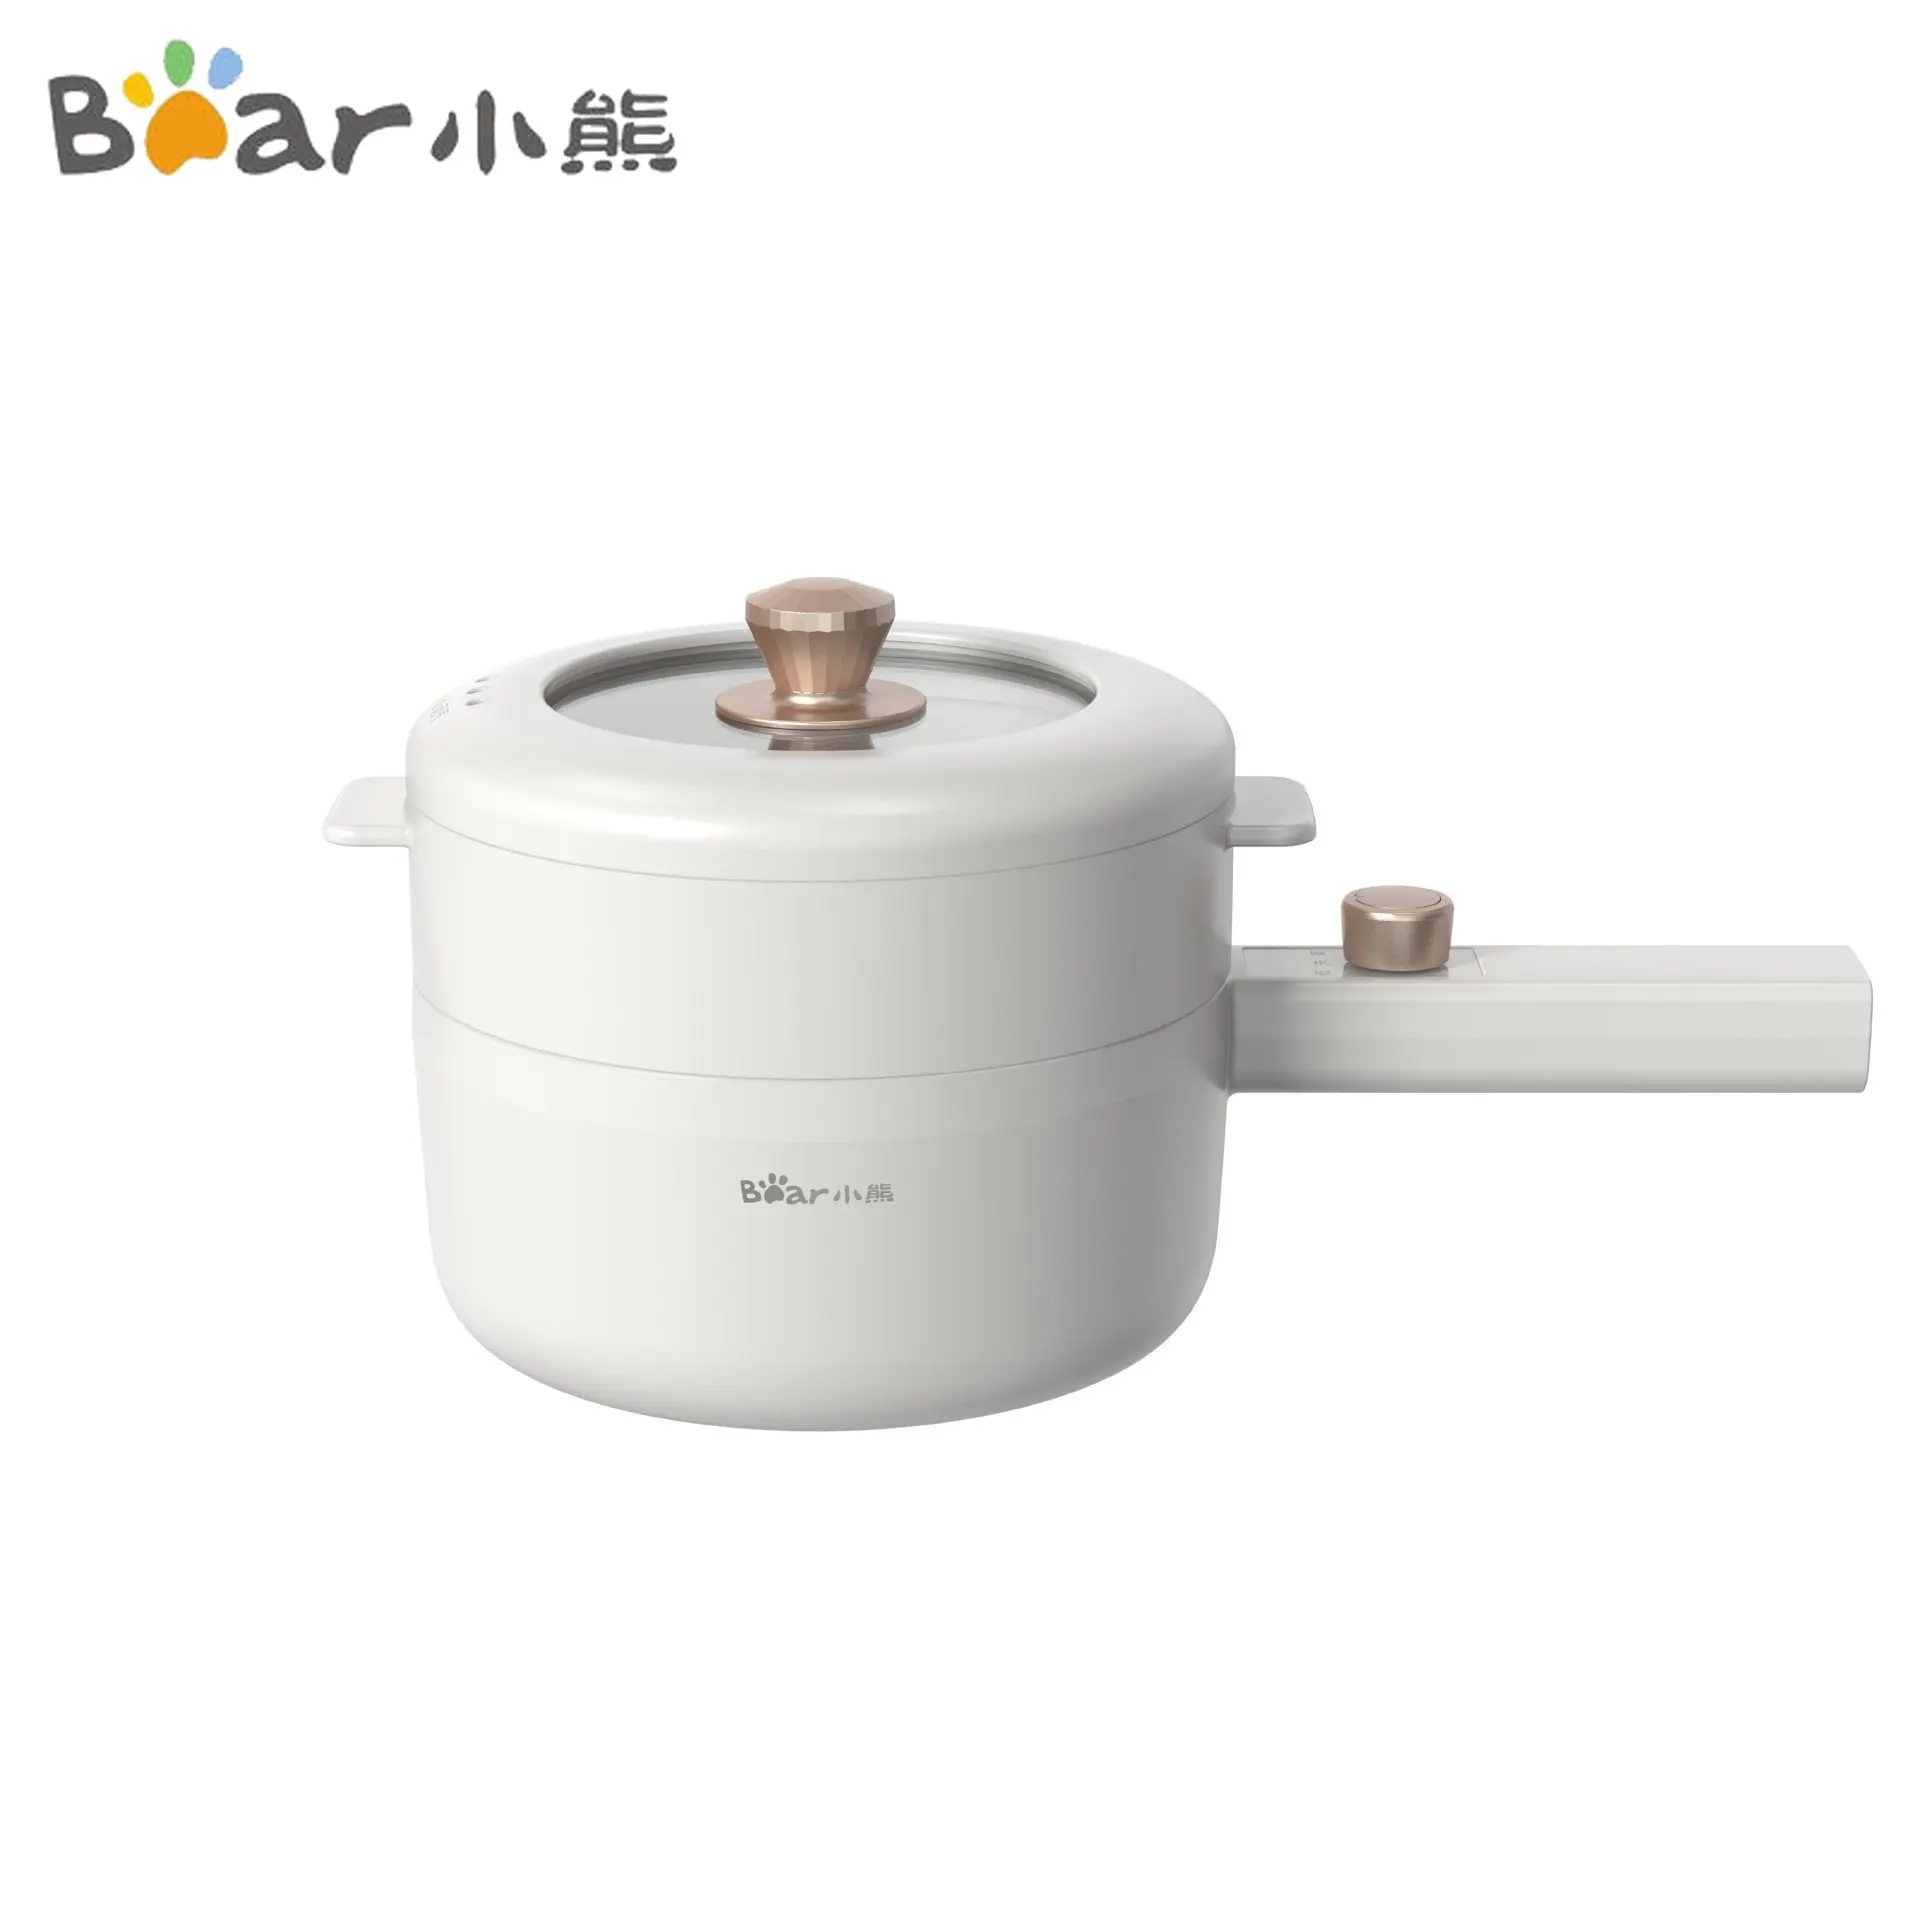 Bear Electric Cooker Pot Mini Non-stick Cooking Single/Double Layer Hot Pot 1.6L Multifunction Electric Heater Pot for Home